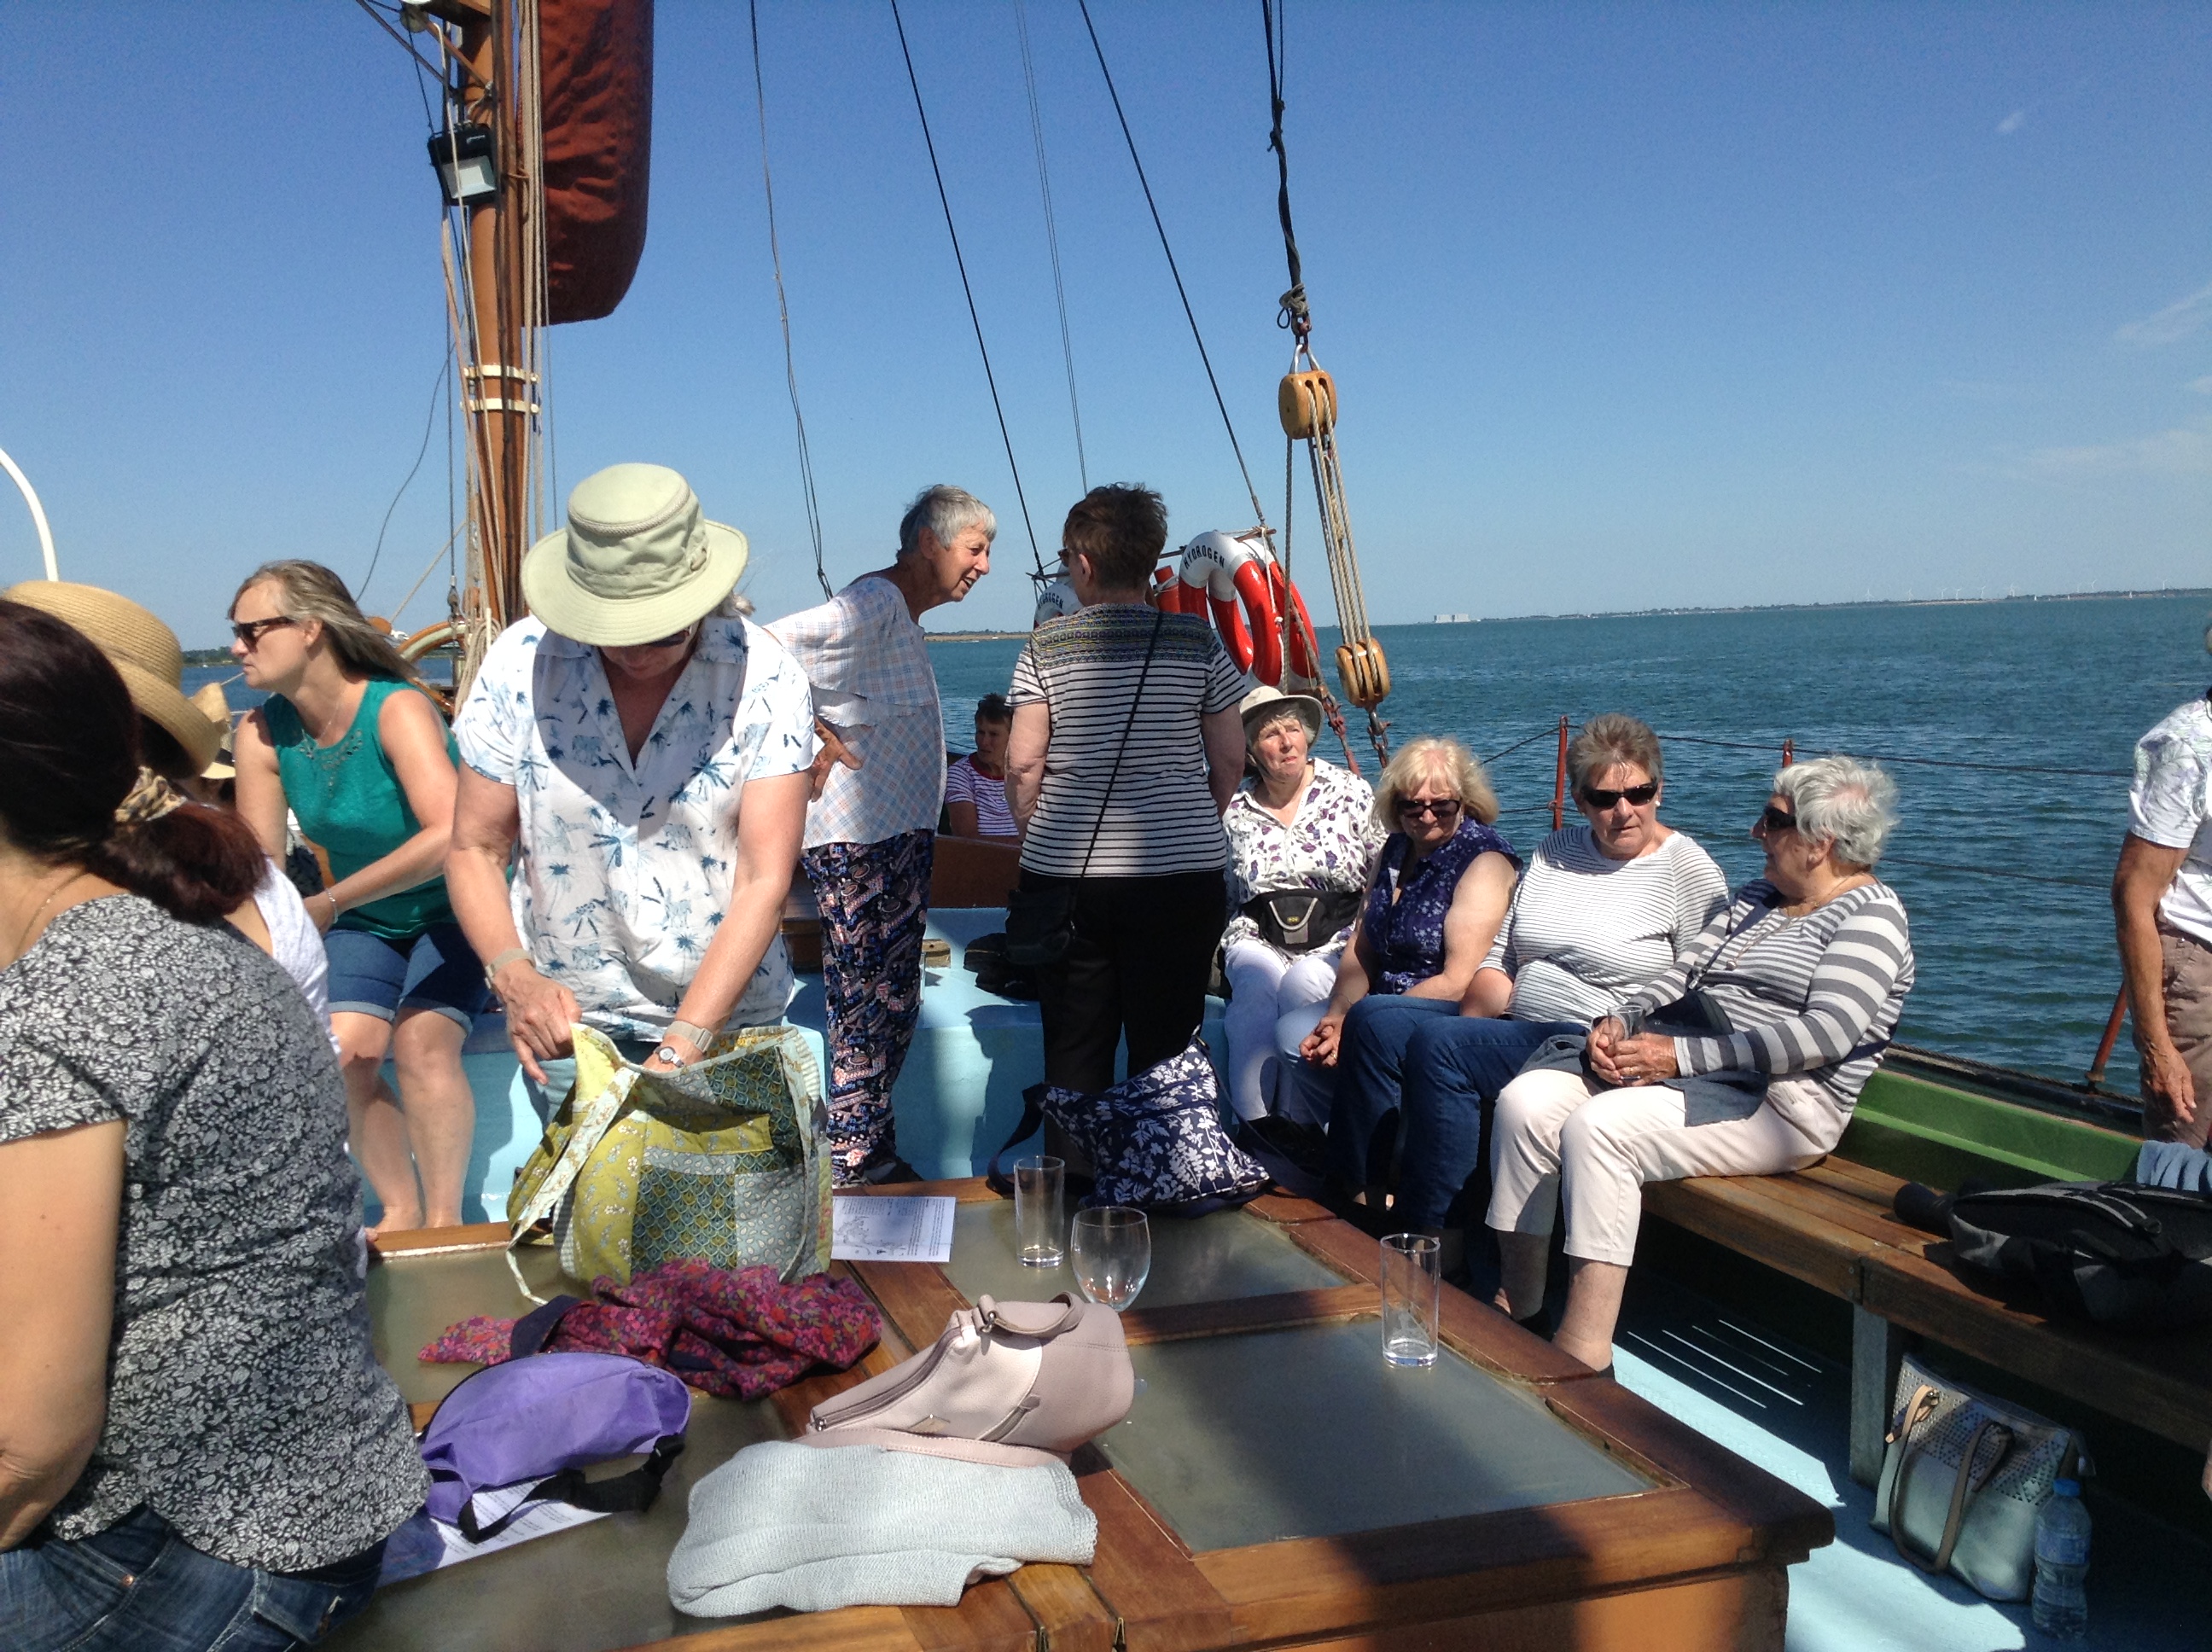 women on a boat at sea